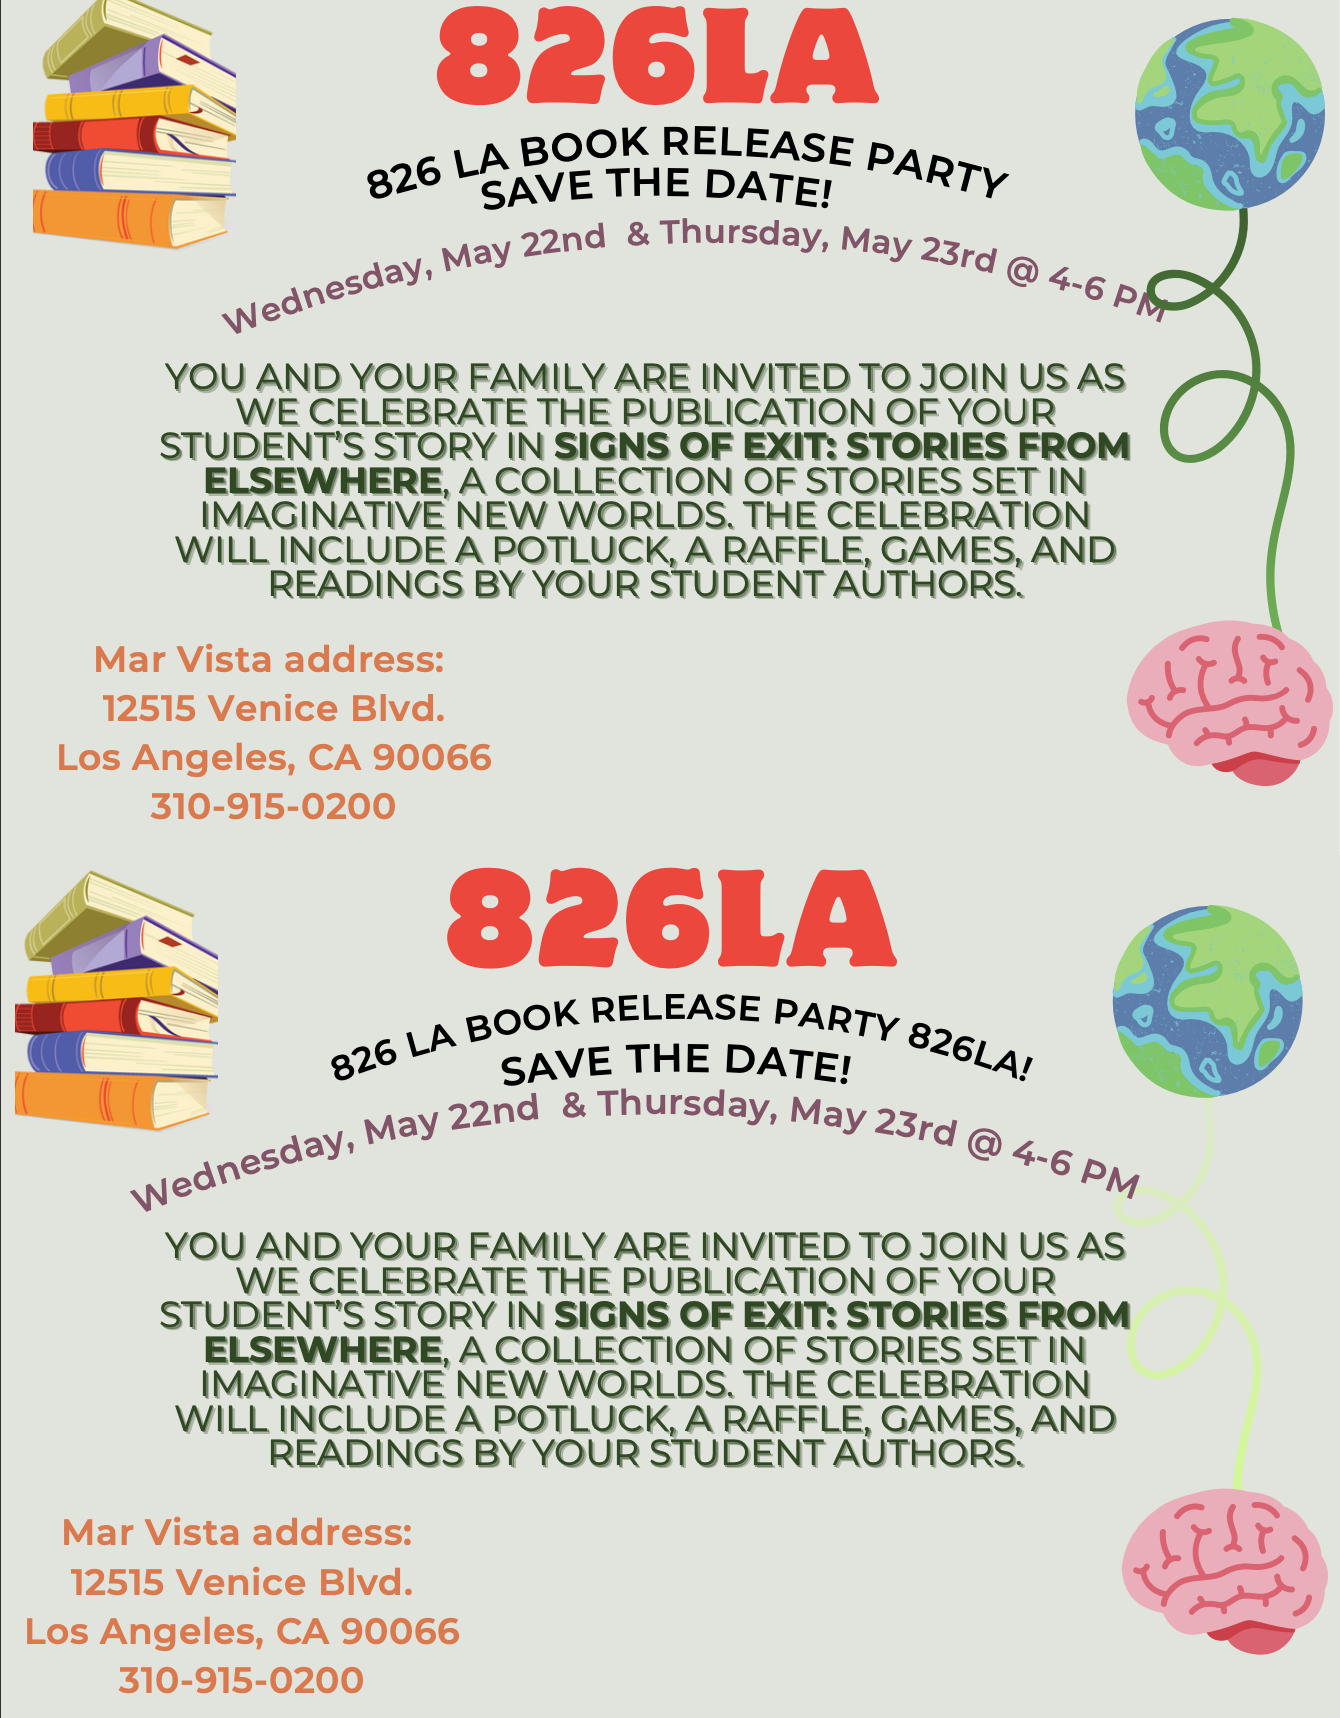 This is an invitation to the 826 LA Book Release Party for the publication of students' stories in "Signs of Exit: Stories from Elsewhere." The event includes a potluck, raffle, games, and readings by student authors. The party will be held on May 22nd and May 23rd at 826LA in Los Angeles.